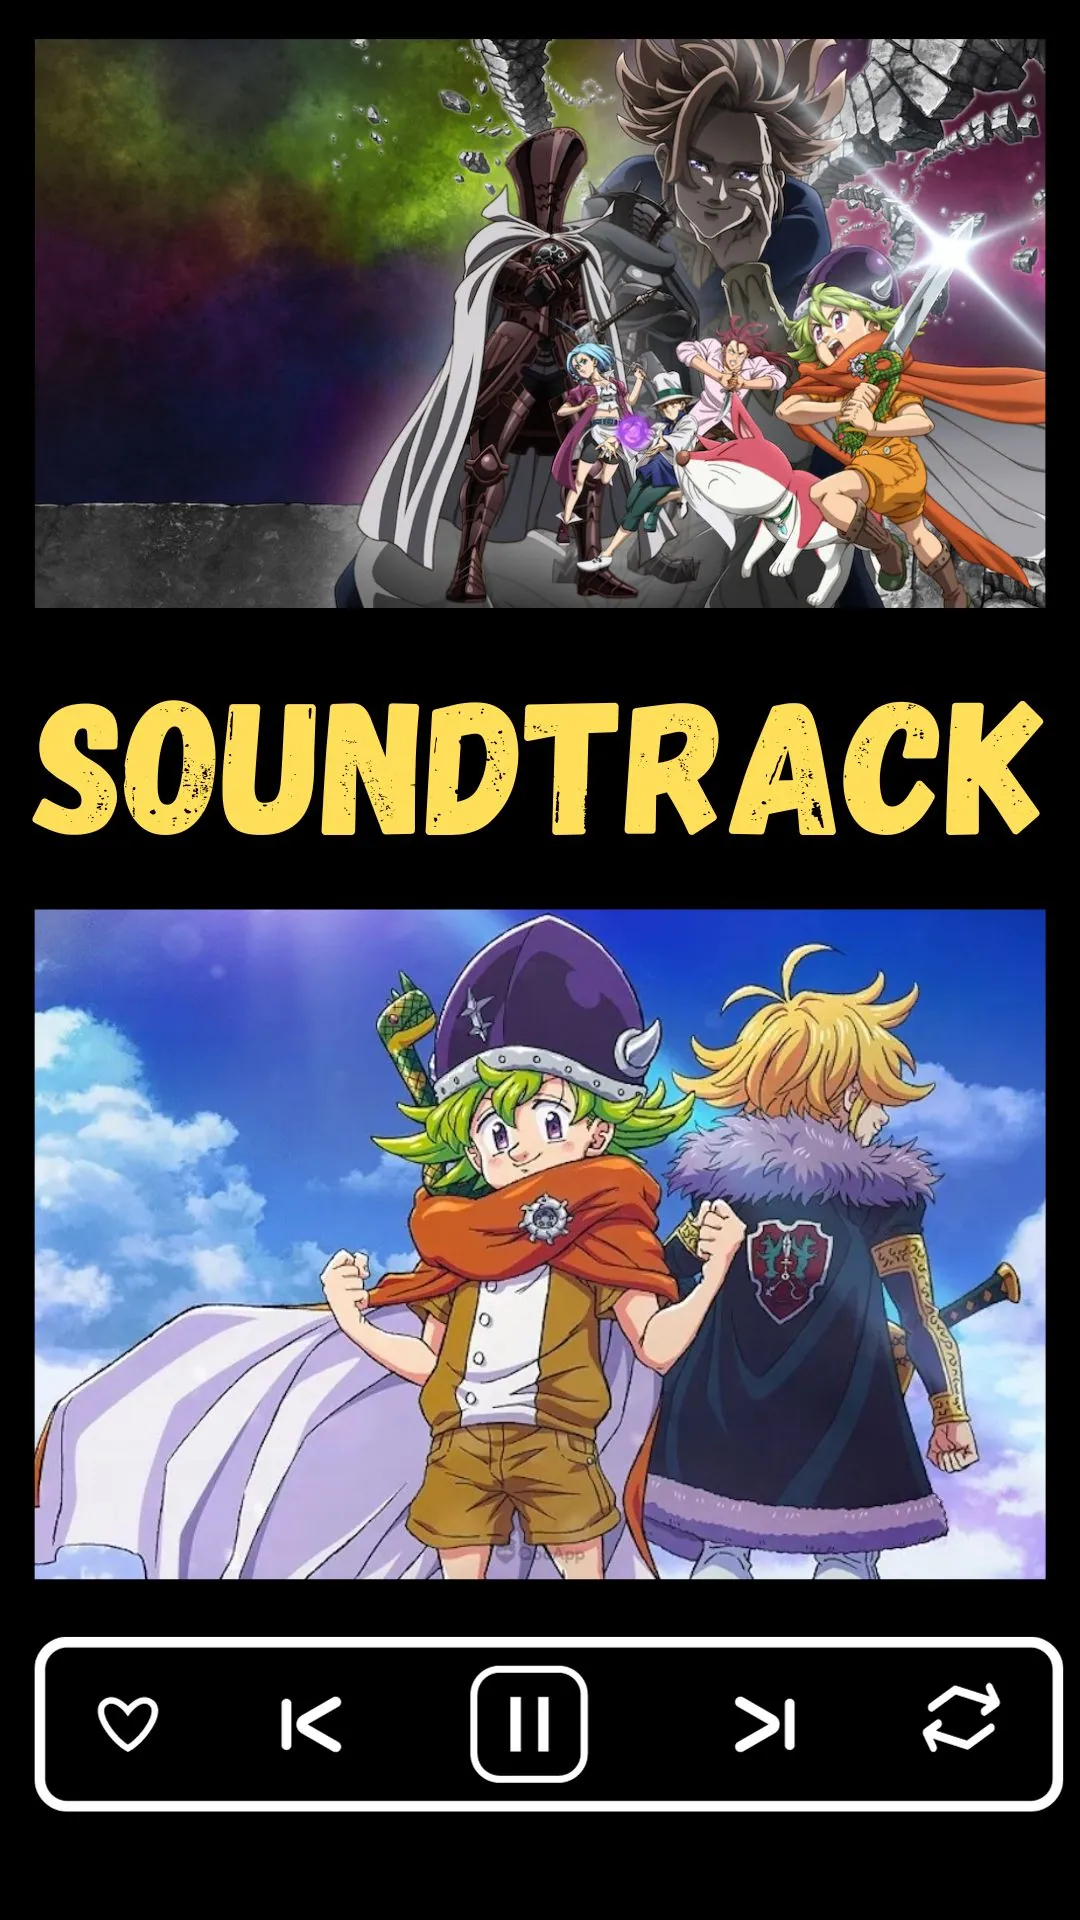 The Seven Deadly Sins Four Knights of the Apocalypse Soundtrack